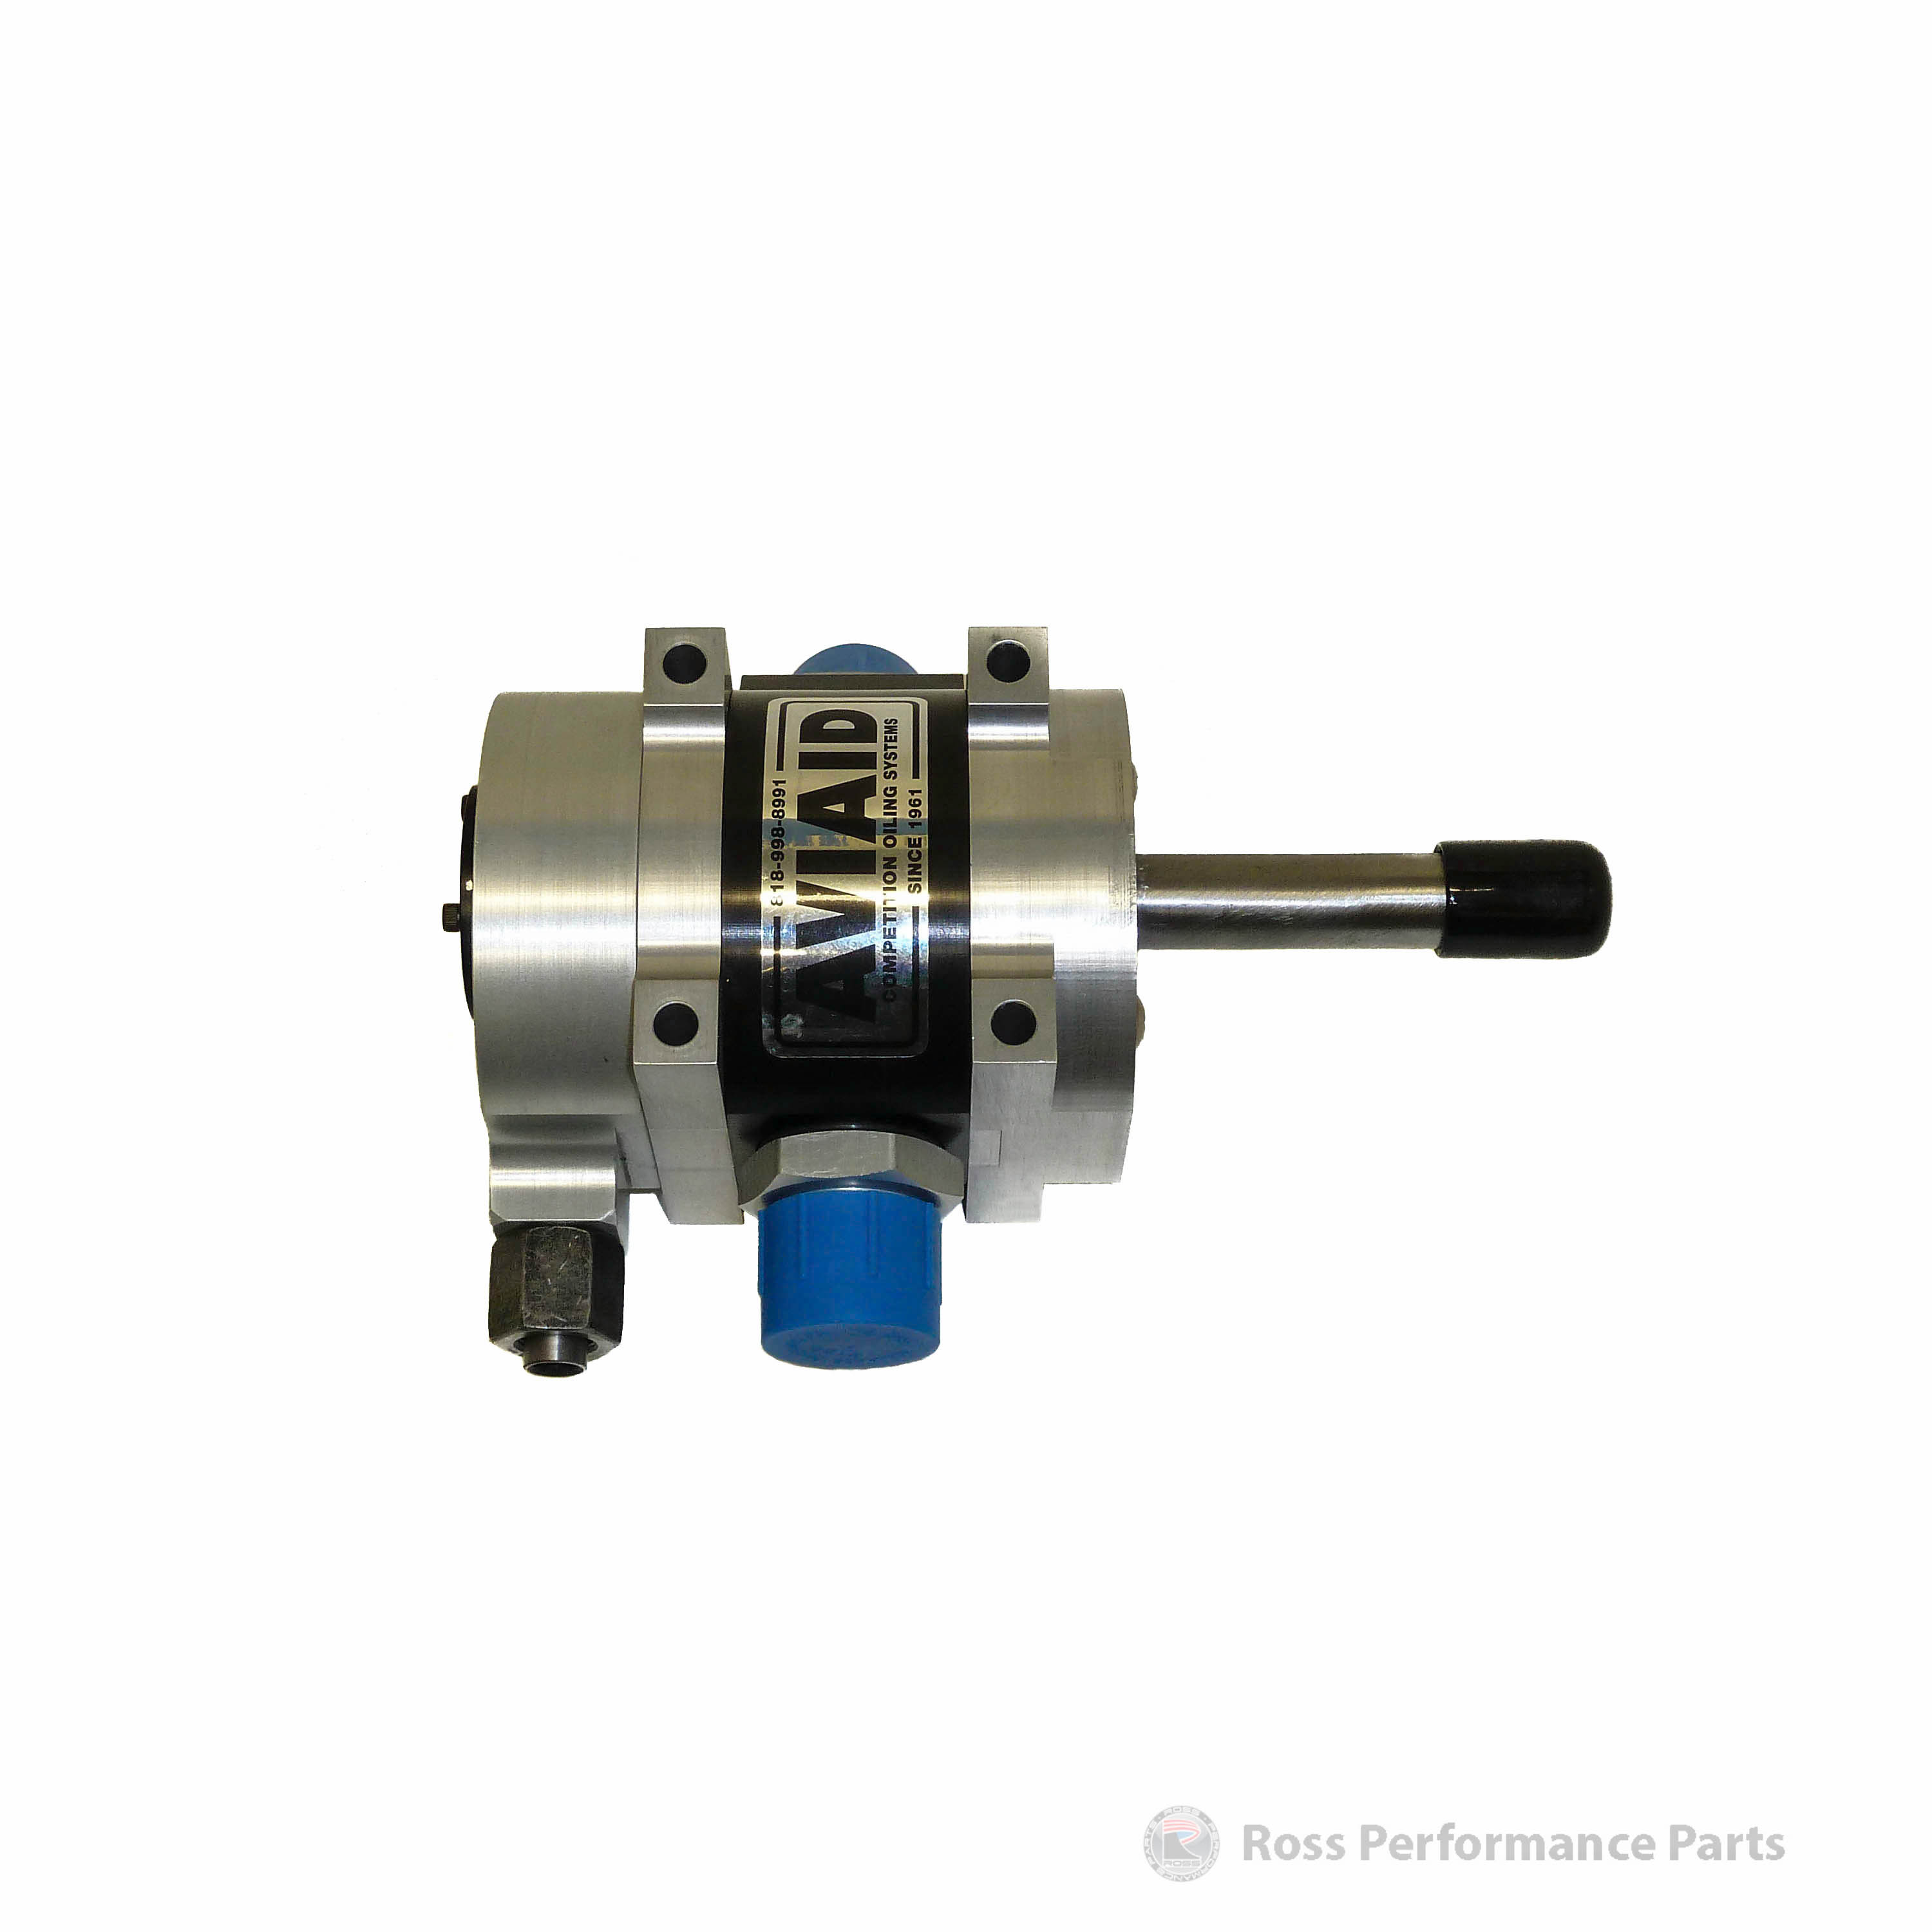 Aviaid Single Stage External Oil Pump - Ross Performance Parts